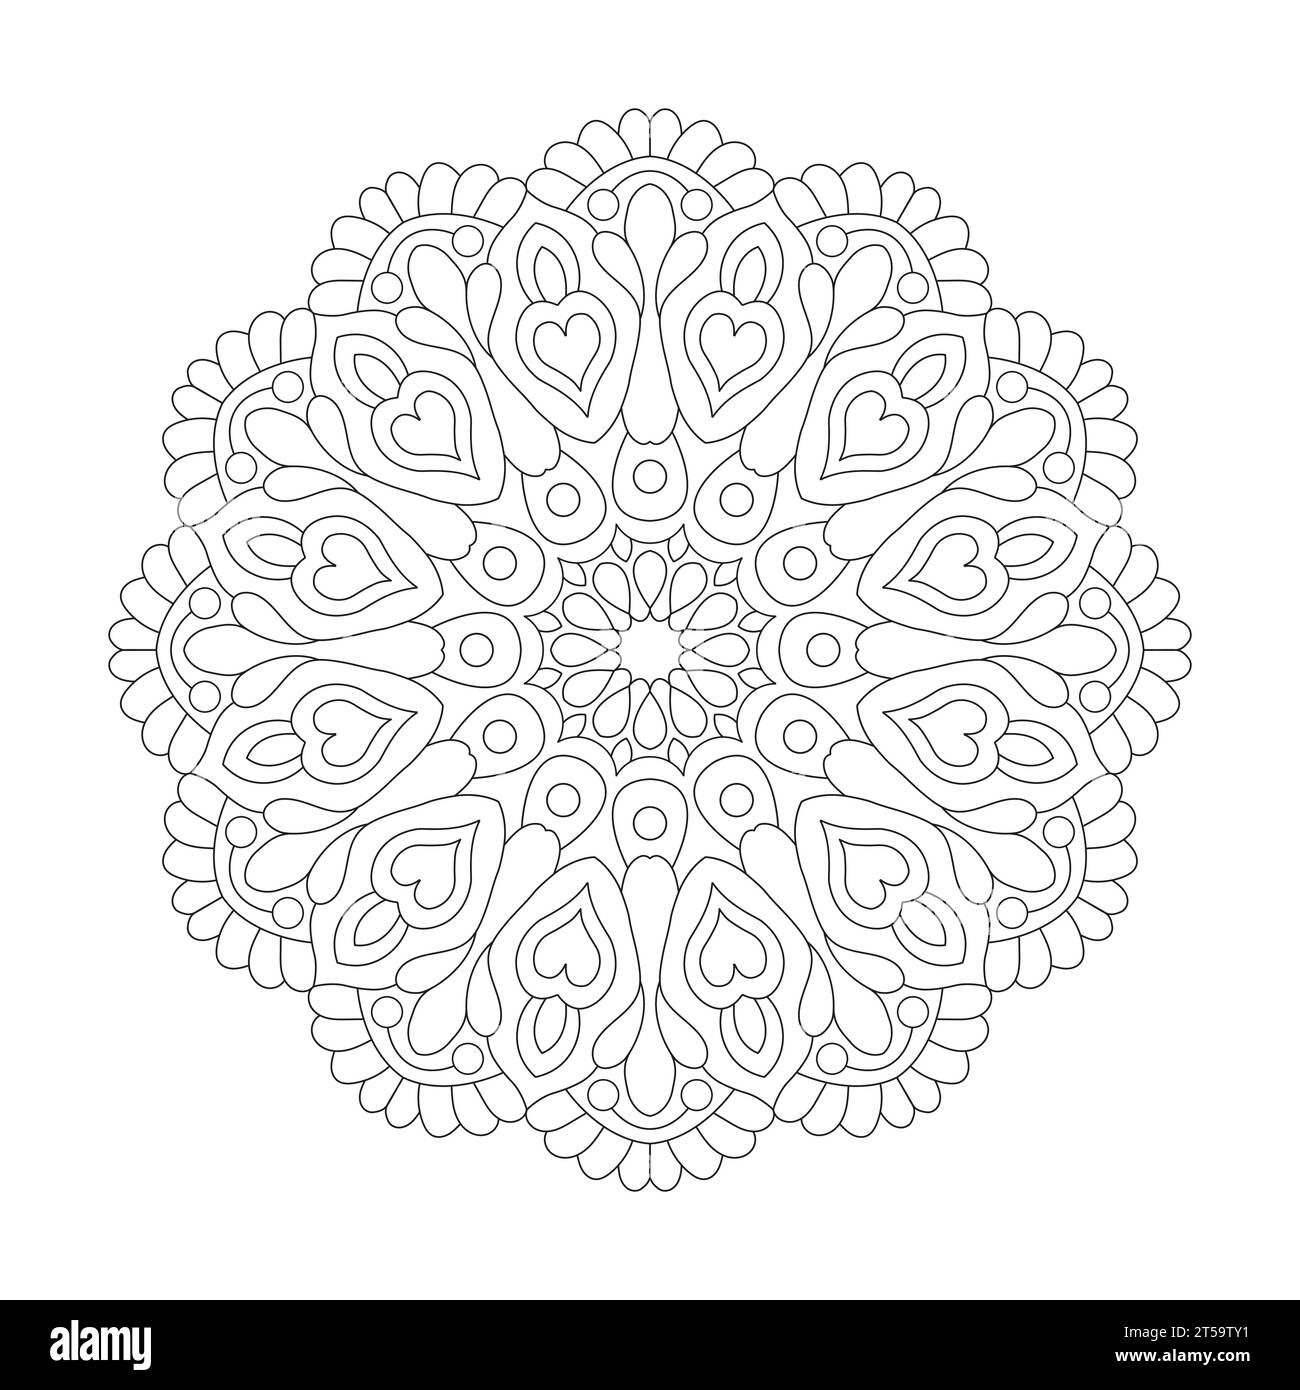 Adult Delicate Petals colouring book mandala page for KDP book interior, Ability to Relax, Brain Experiences, Harmonious Haven, Peaceful Portraits, Stock Vector